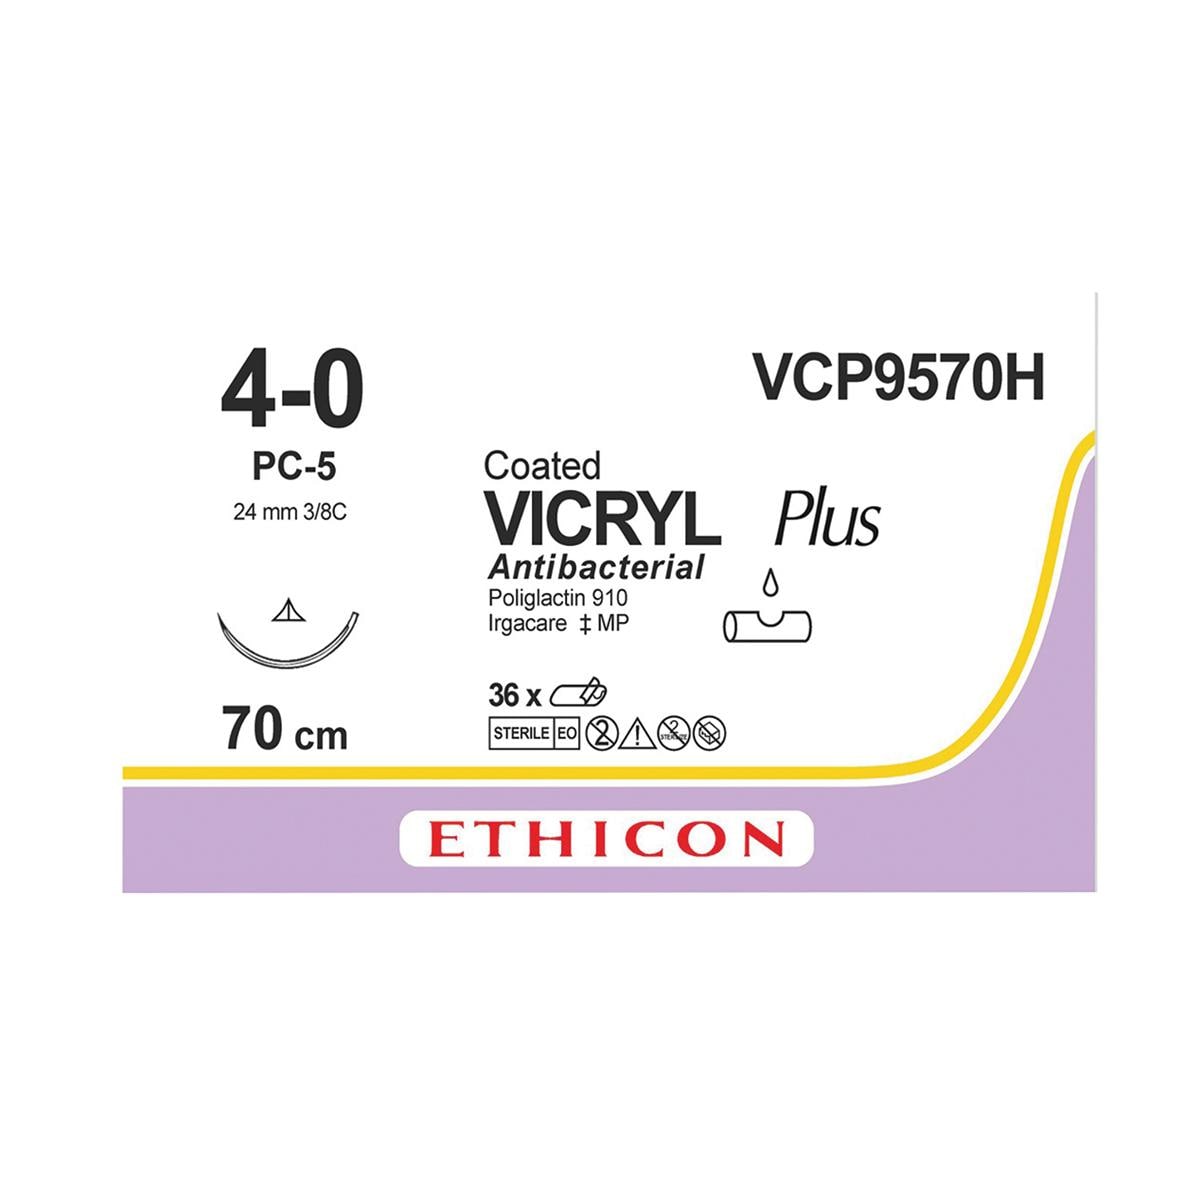 VICRYL Plus Sutures Undyed Coated 70cm 4-0 3/8 Circle Conventional Cutting PC-5 19mm VCP9570H 36pk